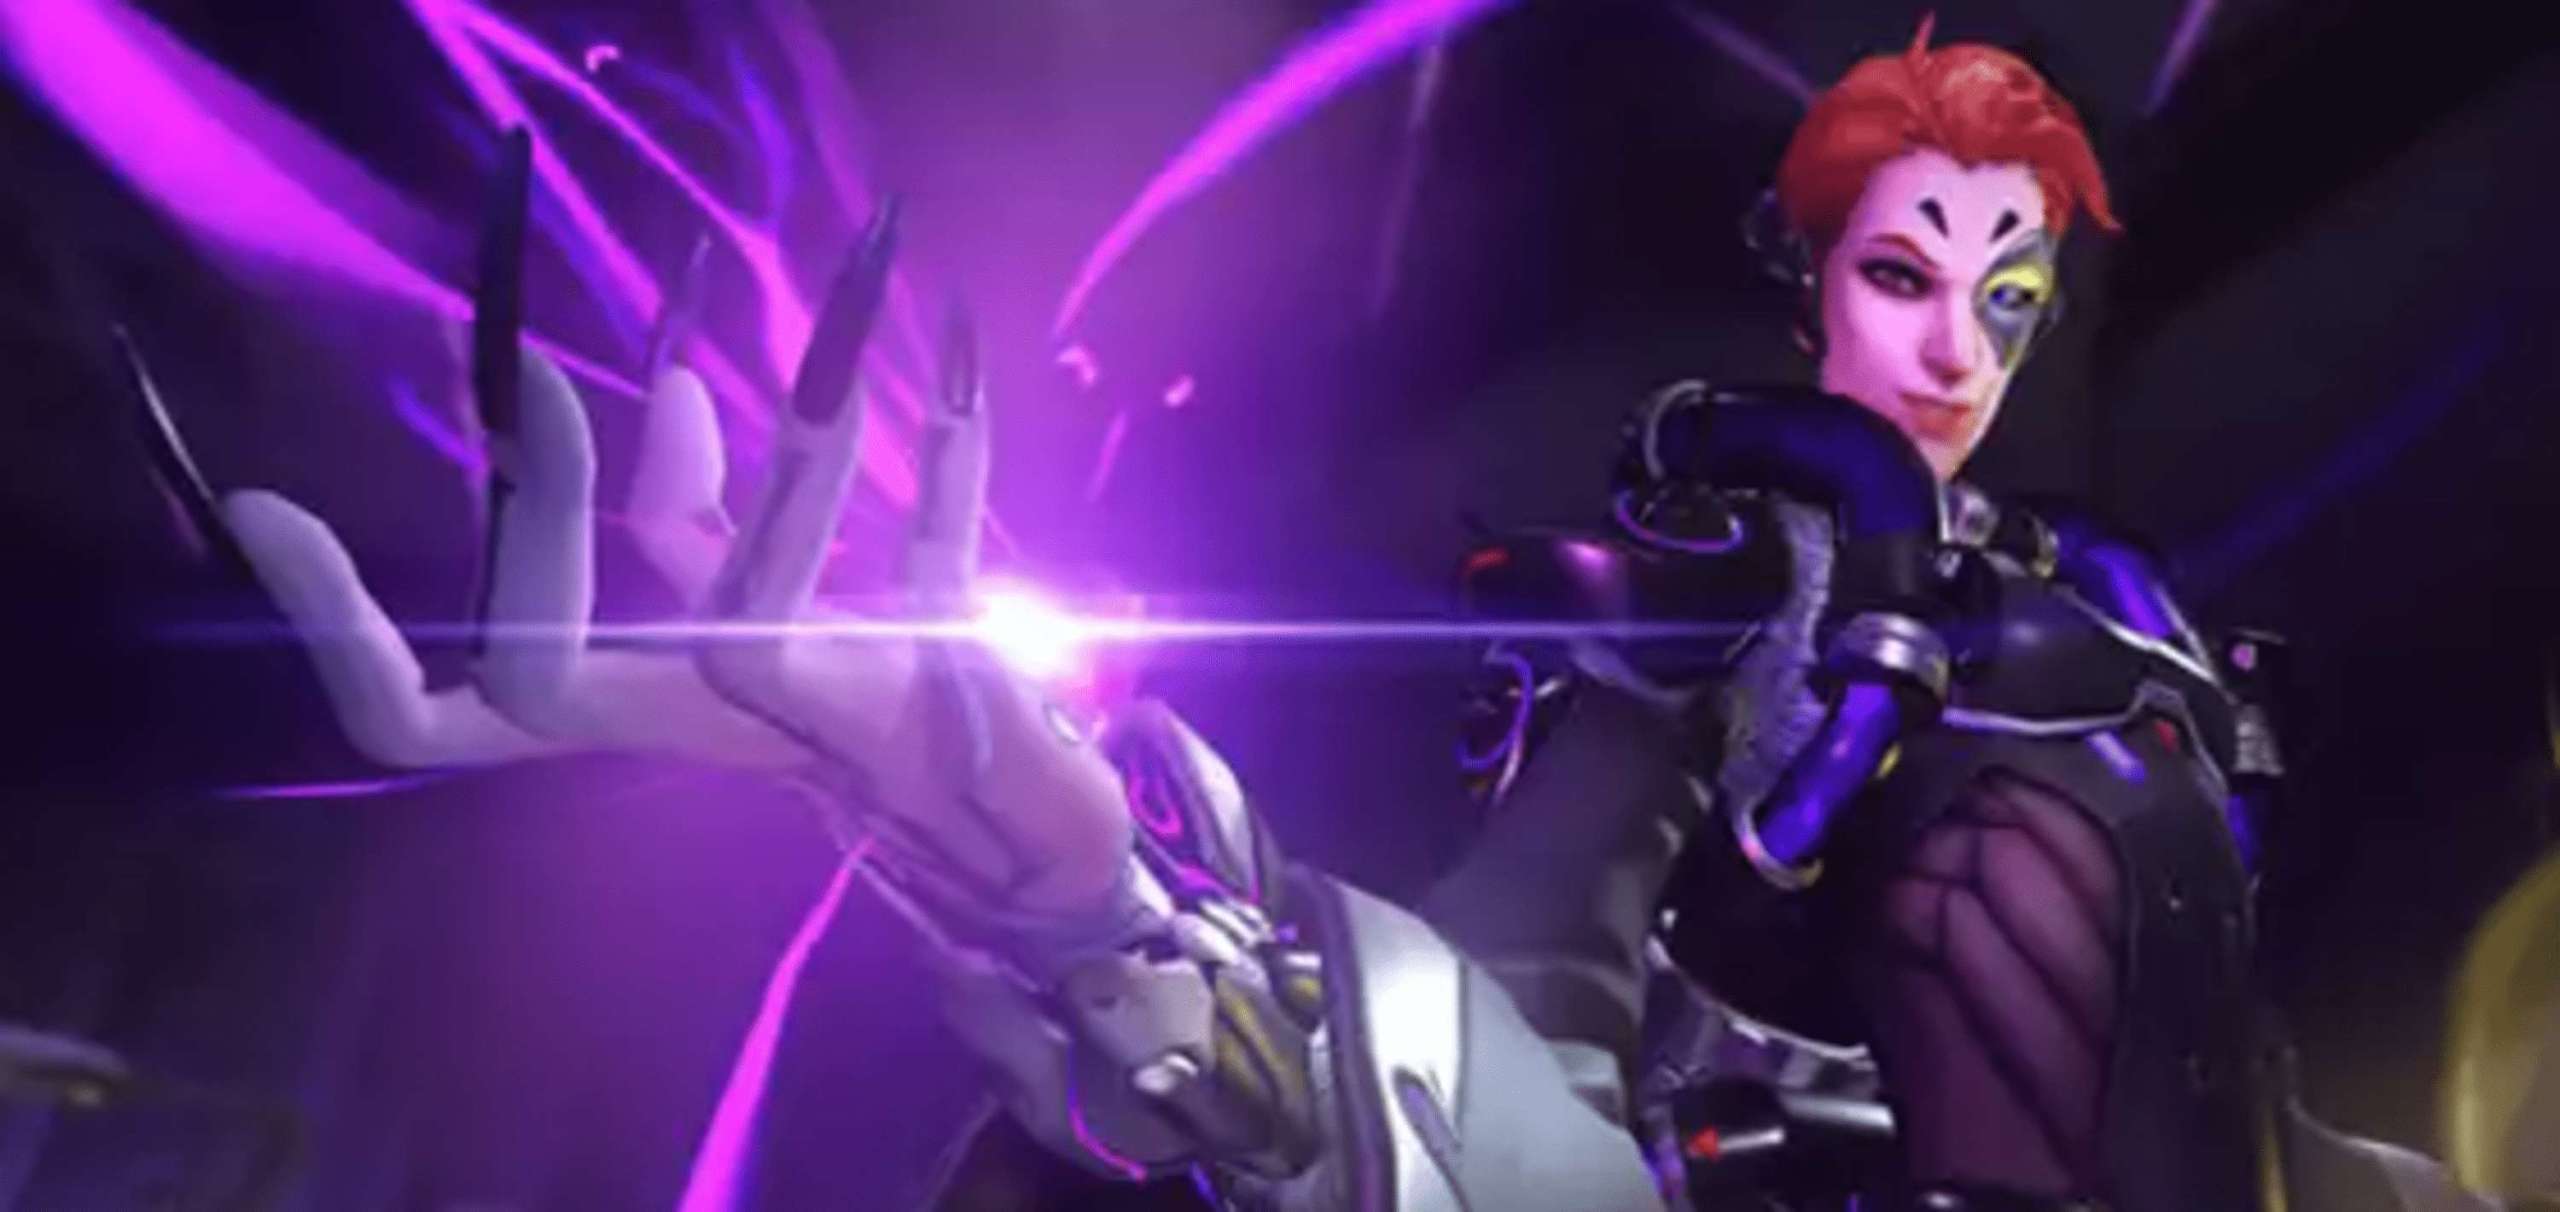 There Will Be No Alterations To The Controversial Character In Overwatch 2 At This Time